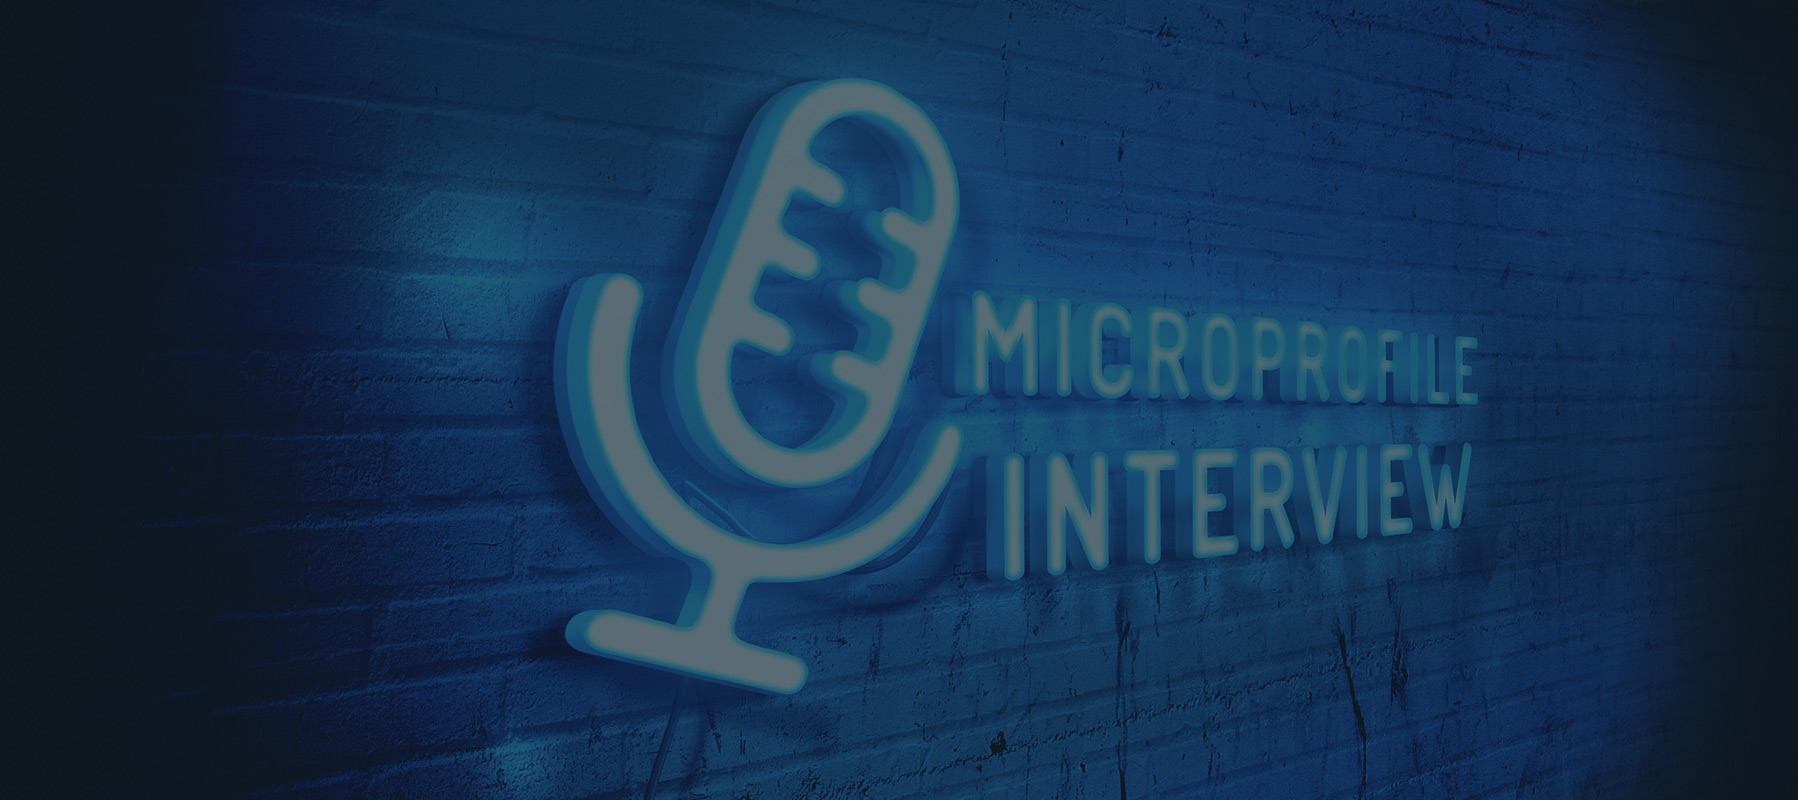 Onboarding Interview: David Salter into MicroProfile